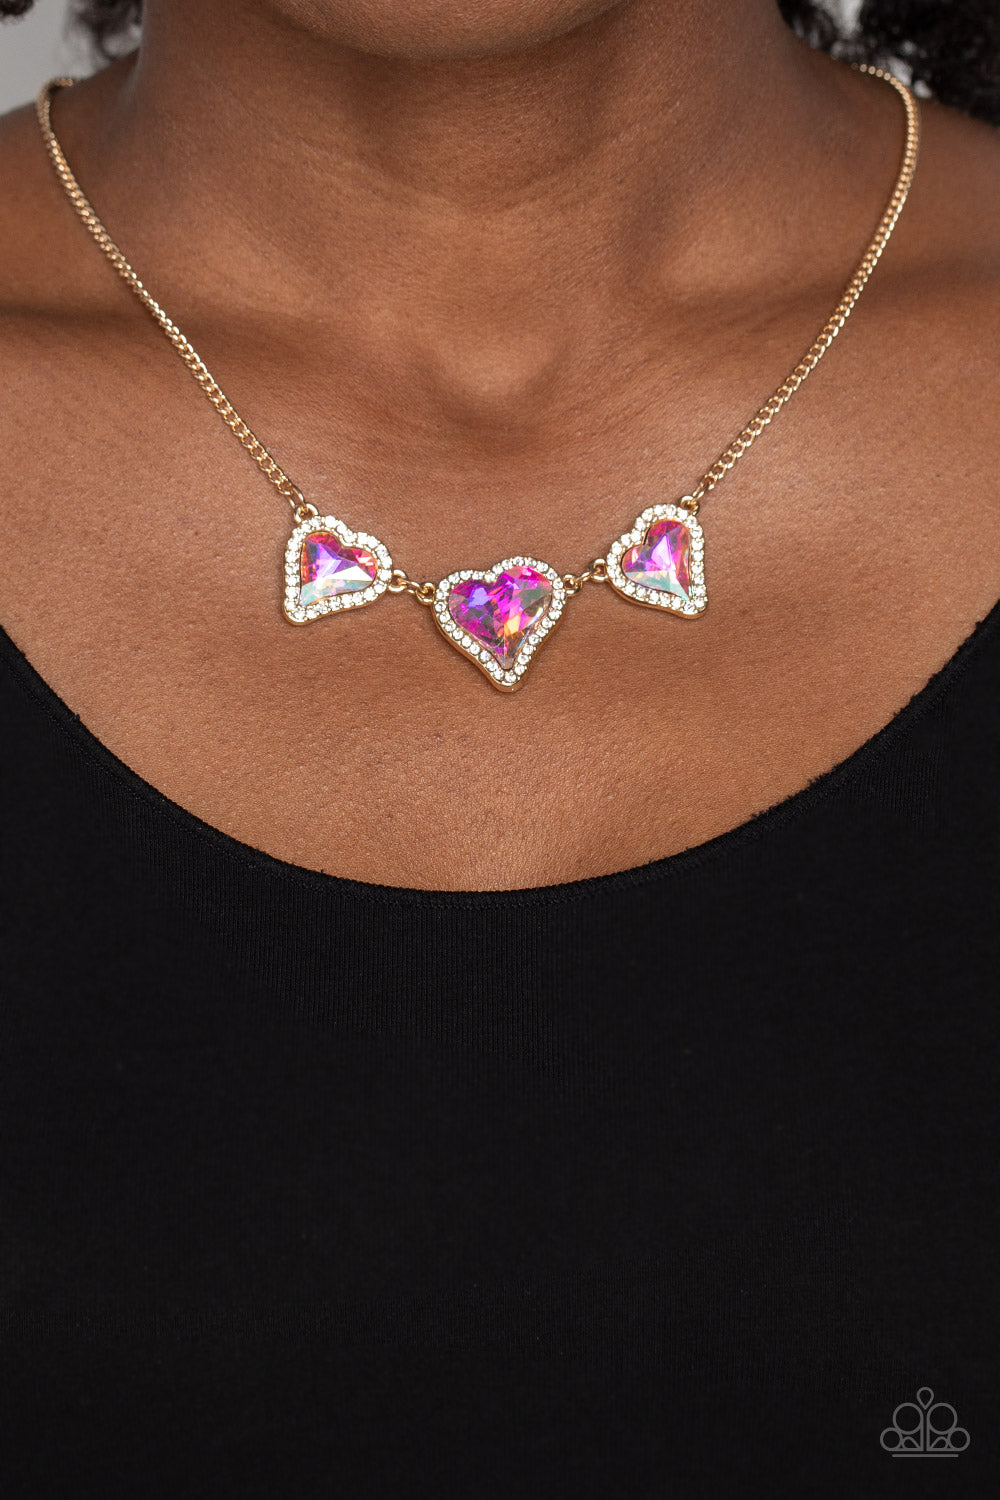 Paparazzi Accessories State of the HEART - Gold Nestled in white rhinestone frames, a trio of glittery iridescent heart-shaped gems delicately links and dangles down the neckline for a dash of swoon-worthy shimmer on a gold chain. Features an adjustable c